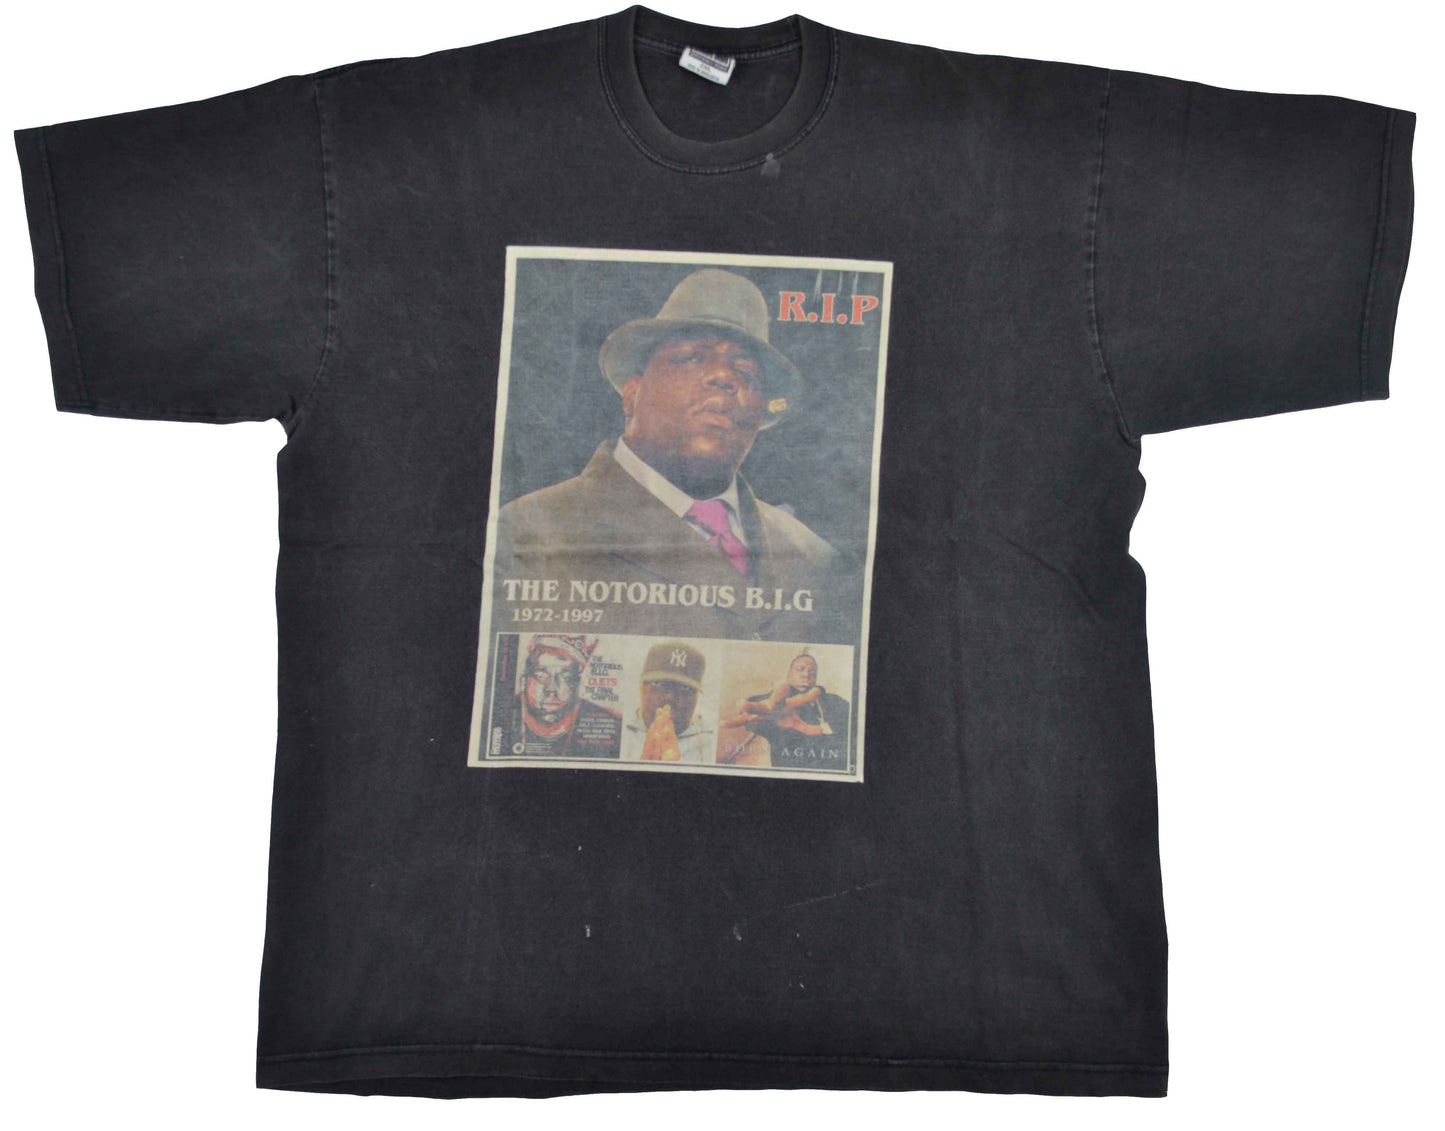 Vintage Biggie 00s "Memorial" Rap Shirt  Christopher Wallace, Biggie Smalls or Notorious B.I.G. began experimenting with music in his teens, where he began to forge his close friendship with Sean "Puffy" Combs. His 1994 debut album, Ready to Die, was a huge success. Rolling Stones Magazine ranked the album at No. 23 of the 100 greatest debut albums of all time. Biggie was killed in Los Angeles on March 9, 1997. The tee has a crazy vintage look.